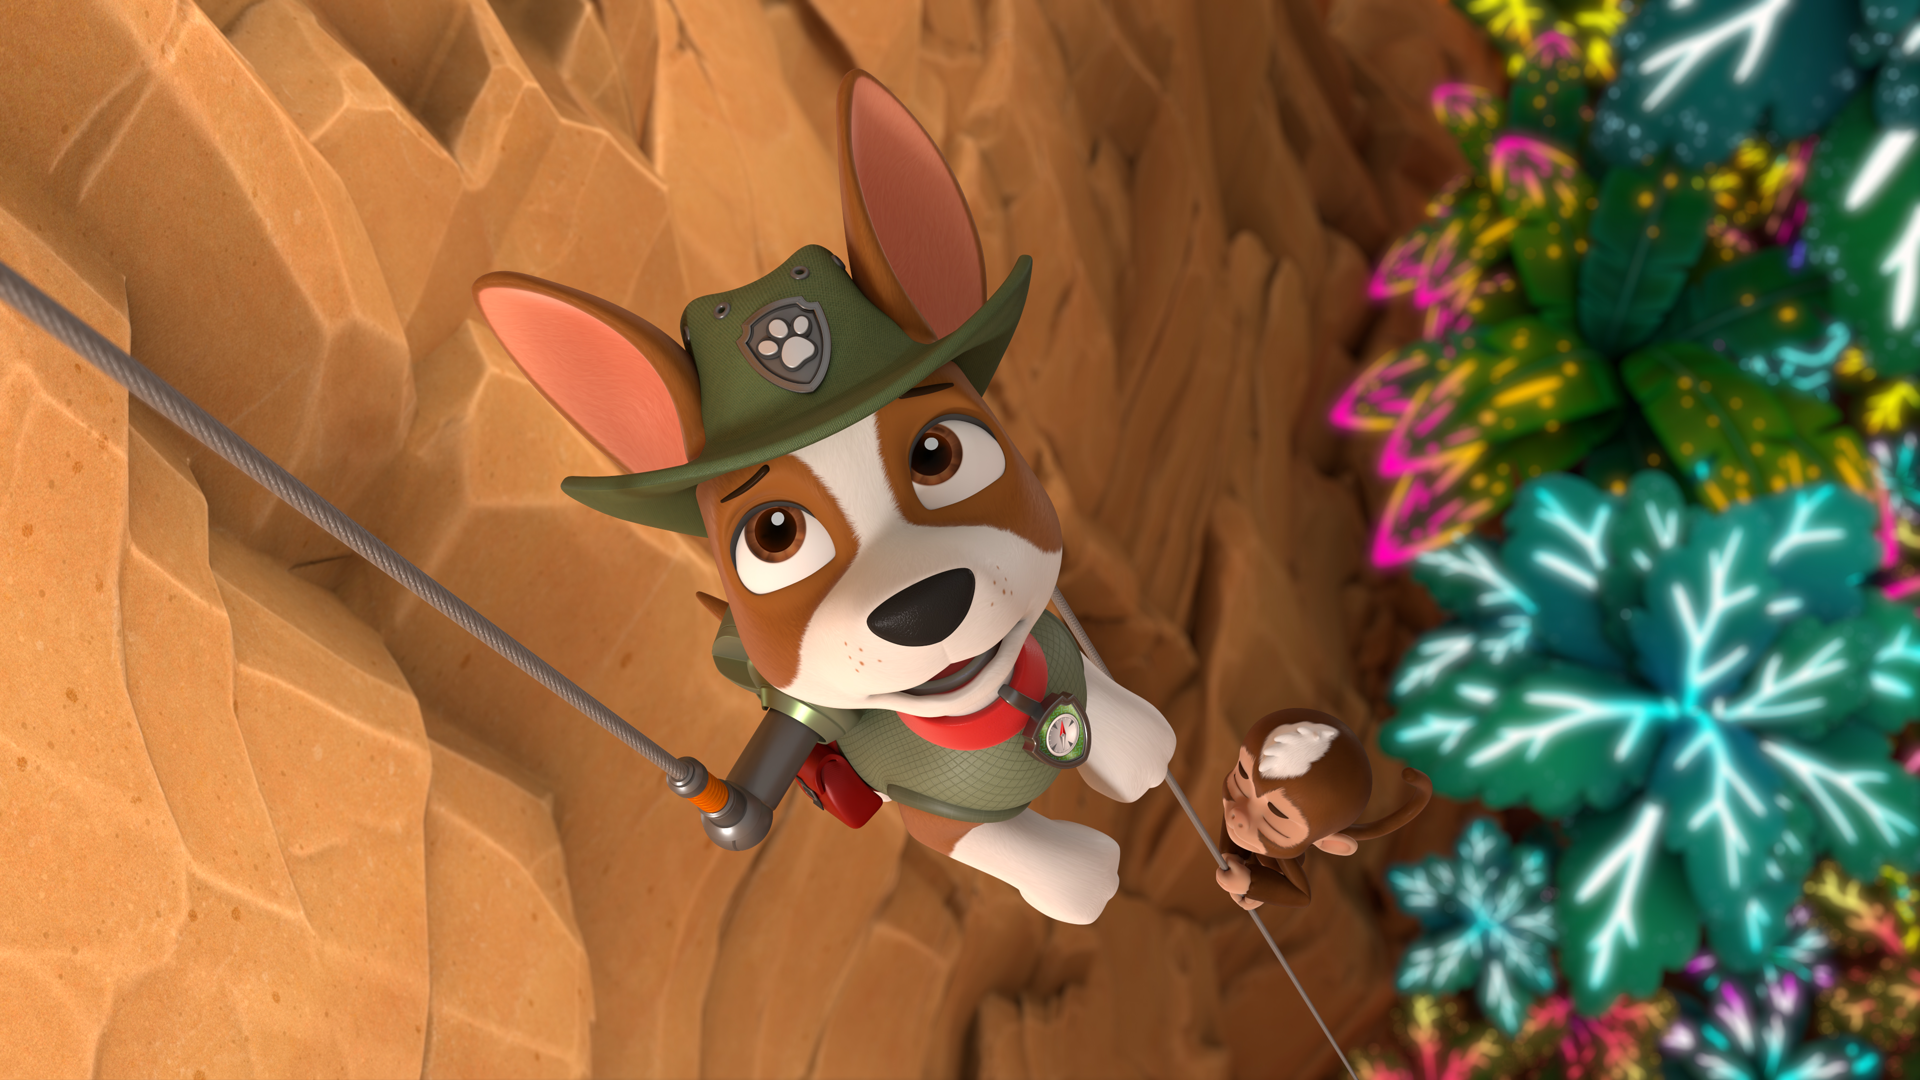 PAW Patrol - Season 3, Ep. 15 - Tracker Joins the Pups! - Full Episode